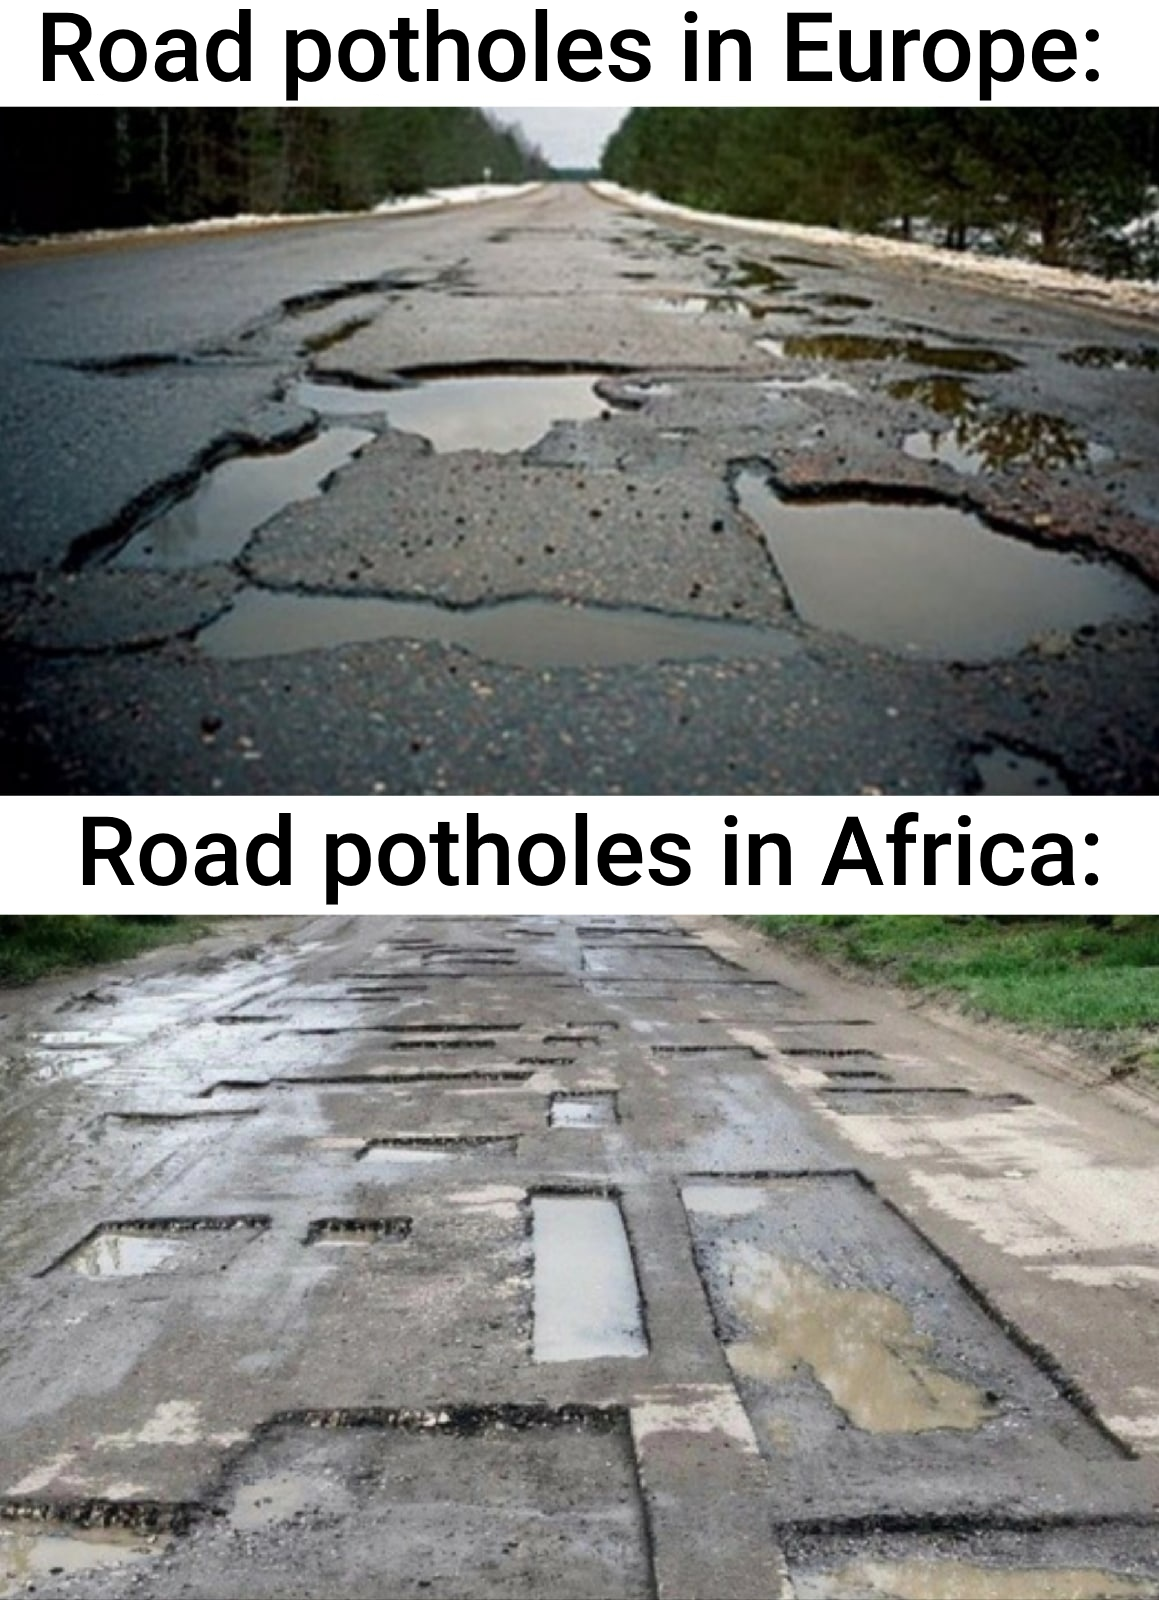 Wait, are there roads in Africa at all?